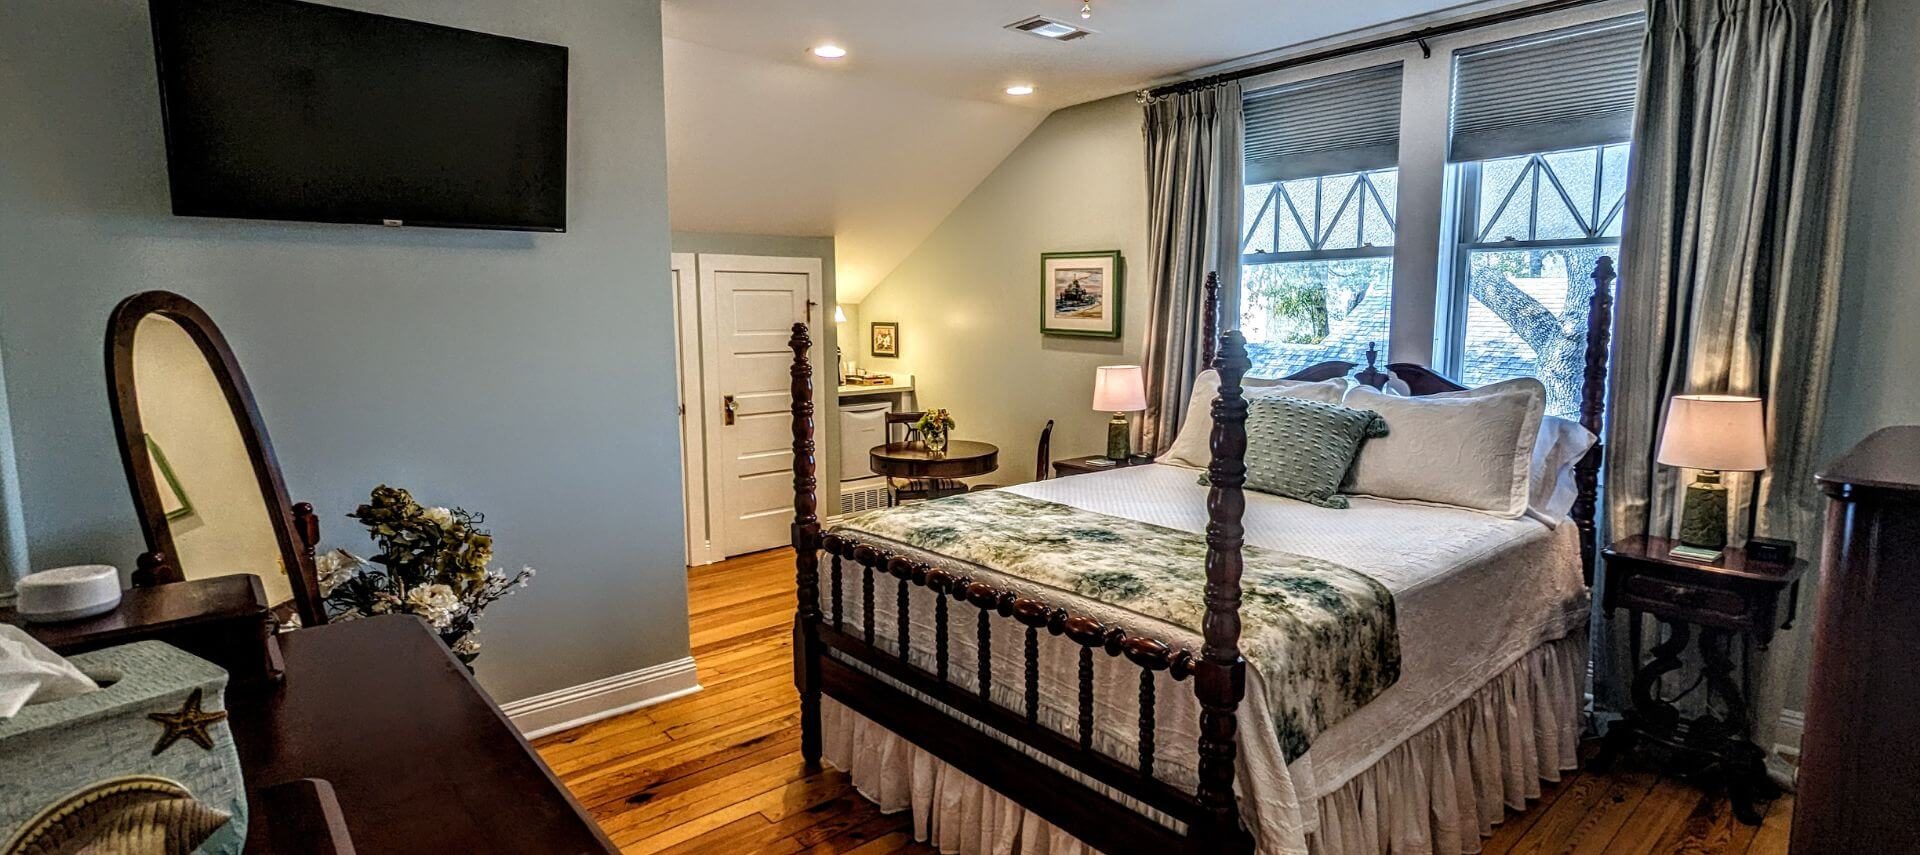 A bedroom with cream and sage colored walls, wood floors, a 4 poster bed with white bedding and a colorful quilt, with windows and green curtains, along with a full length oval mirror and flat screen TV